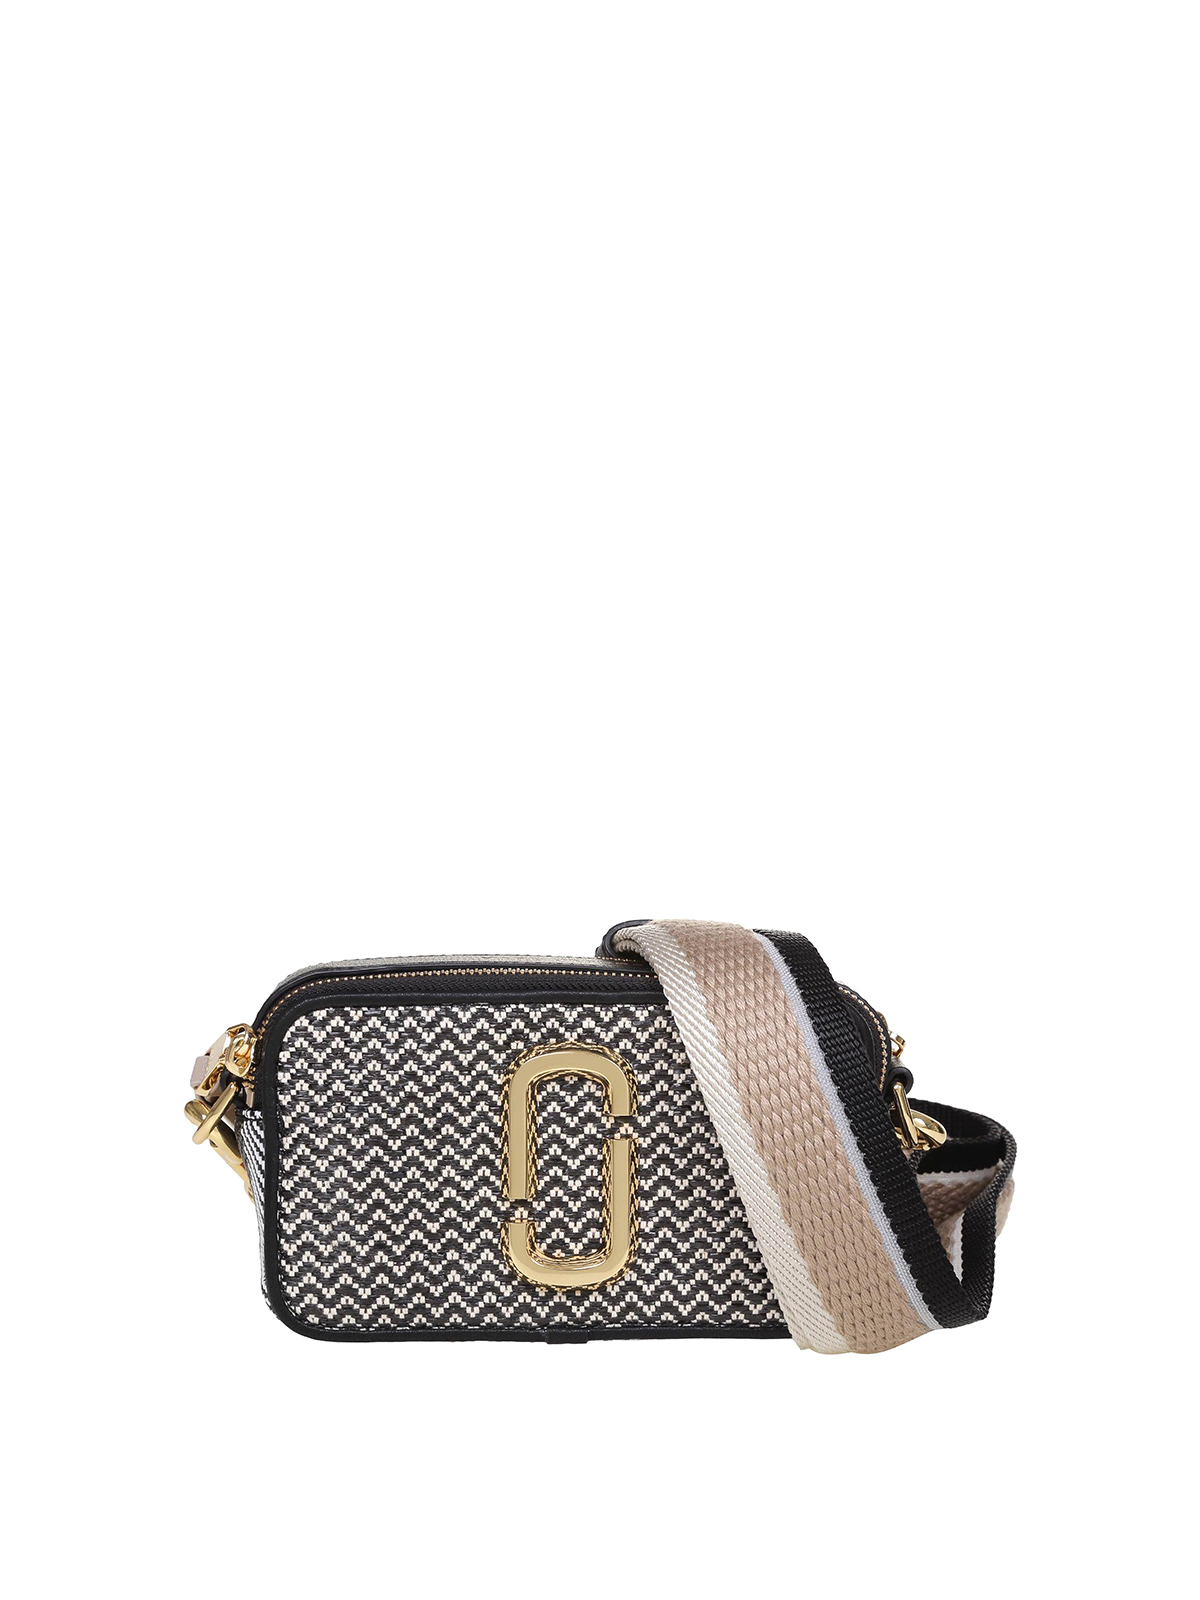 Marc Jacobs The Woven Snapshot Bag in Black